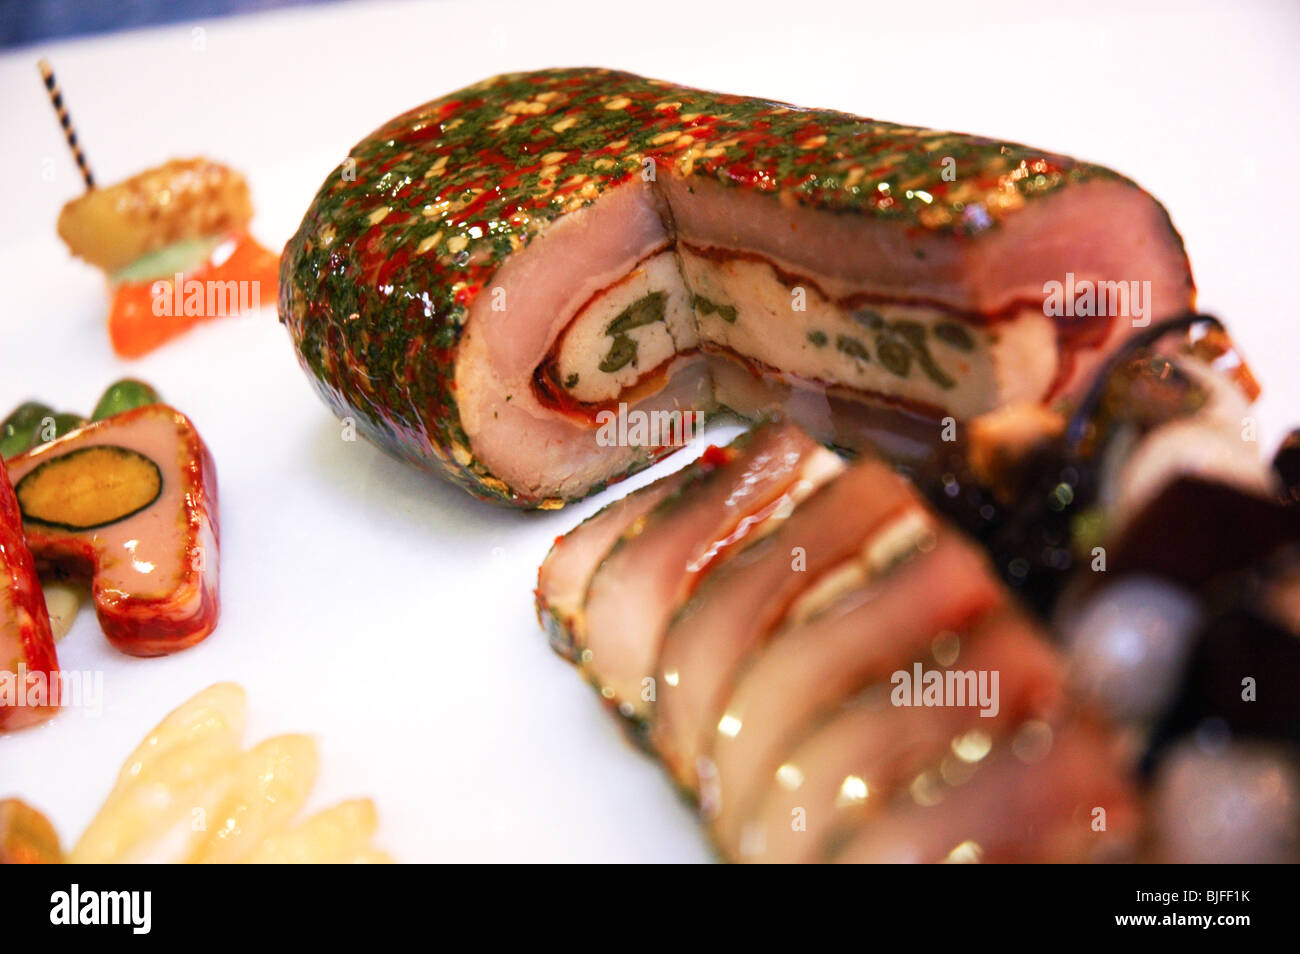 italian cuisine served in a decorated dish for a gastronomic competition Stock Photo